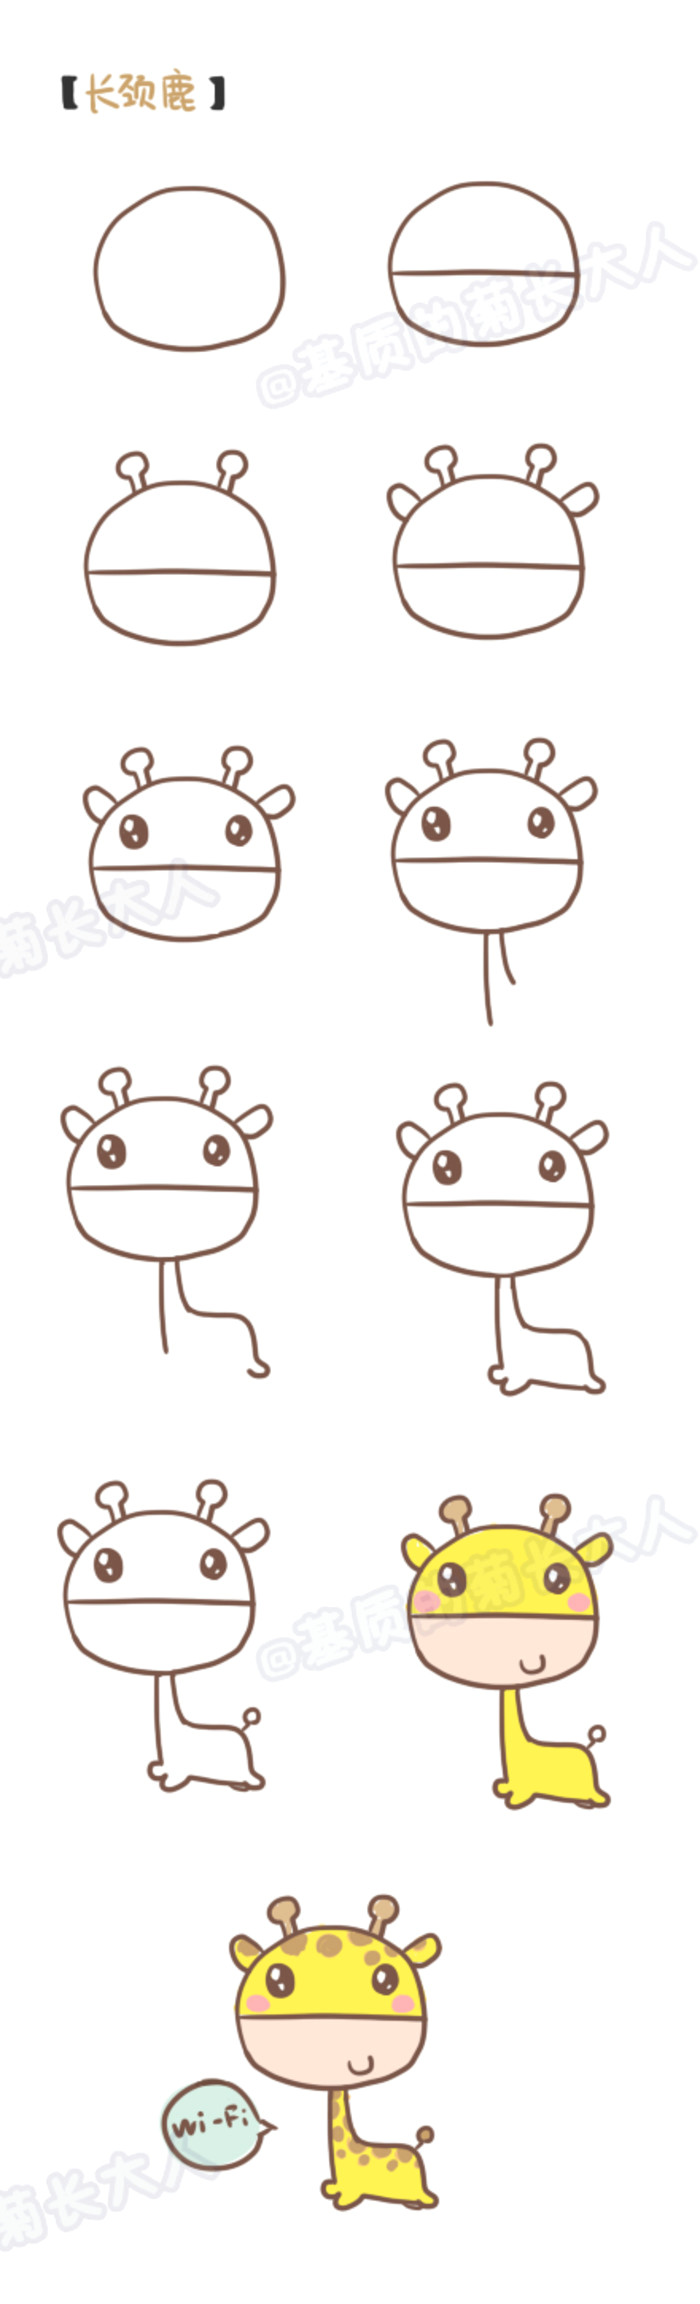 Cute Easy Drawings Step by Step Animals How to Draw A Giraffe Daisy Grew Up In Person From the